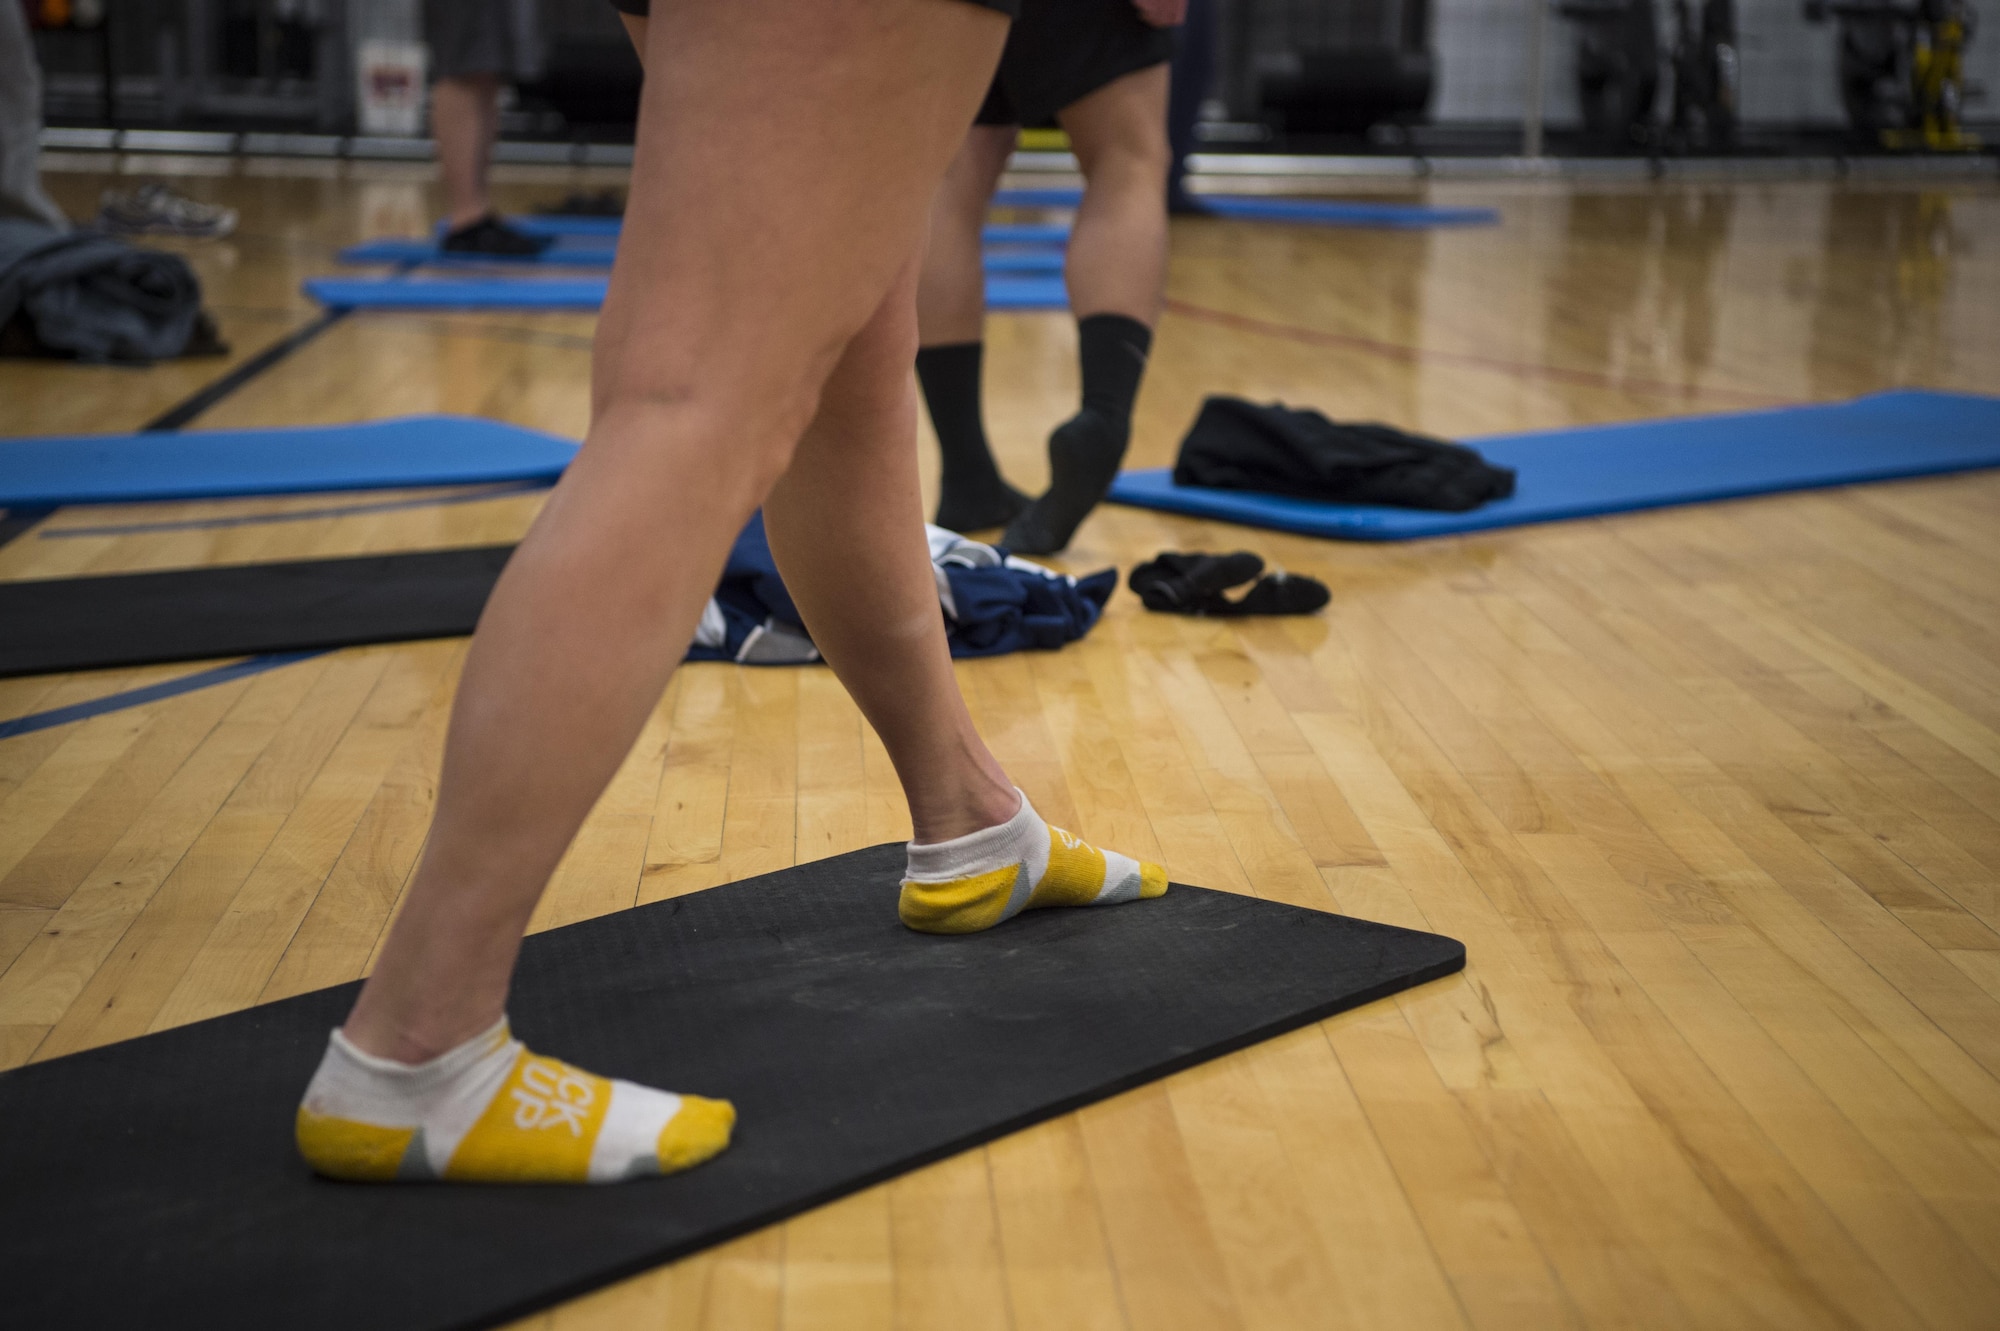 Staff Sgt. Vanessa Harsh, 90th Missile Wing occupational safety technician, performs a calf stretch during a natural running form clinic at F.E. Warren Air Force Base, Wyo., Oct. 6, 2016. Students learned multiple stretches to familiarize the different areas of muscles used when running. “We are teaching this class to show Airmen how to run more efficiently and reduce the risk of injury,” said Ian Adamson, president of Healthy Running. “We everyone to be fit and functional for their duties, while keeping them happier and healthier at home.” (U.S. Air Force photo by Staff Sgt. Christopher Ruano)